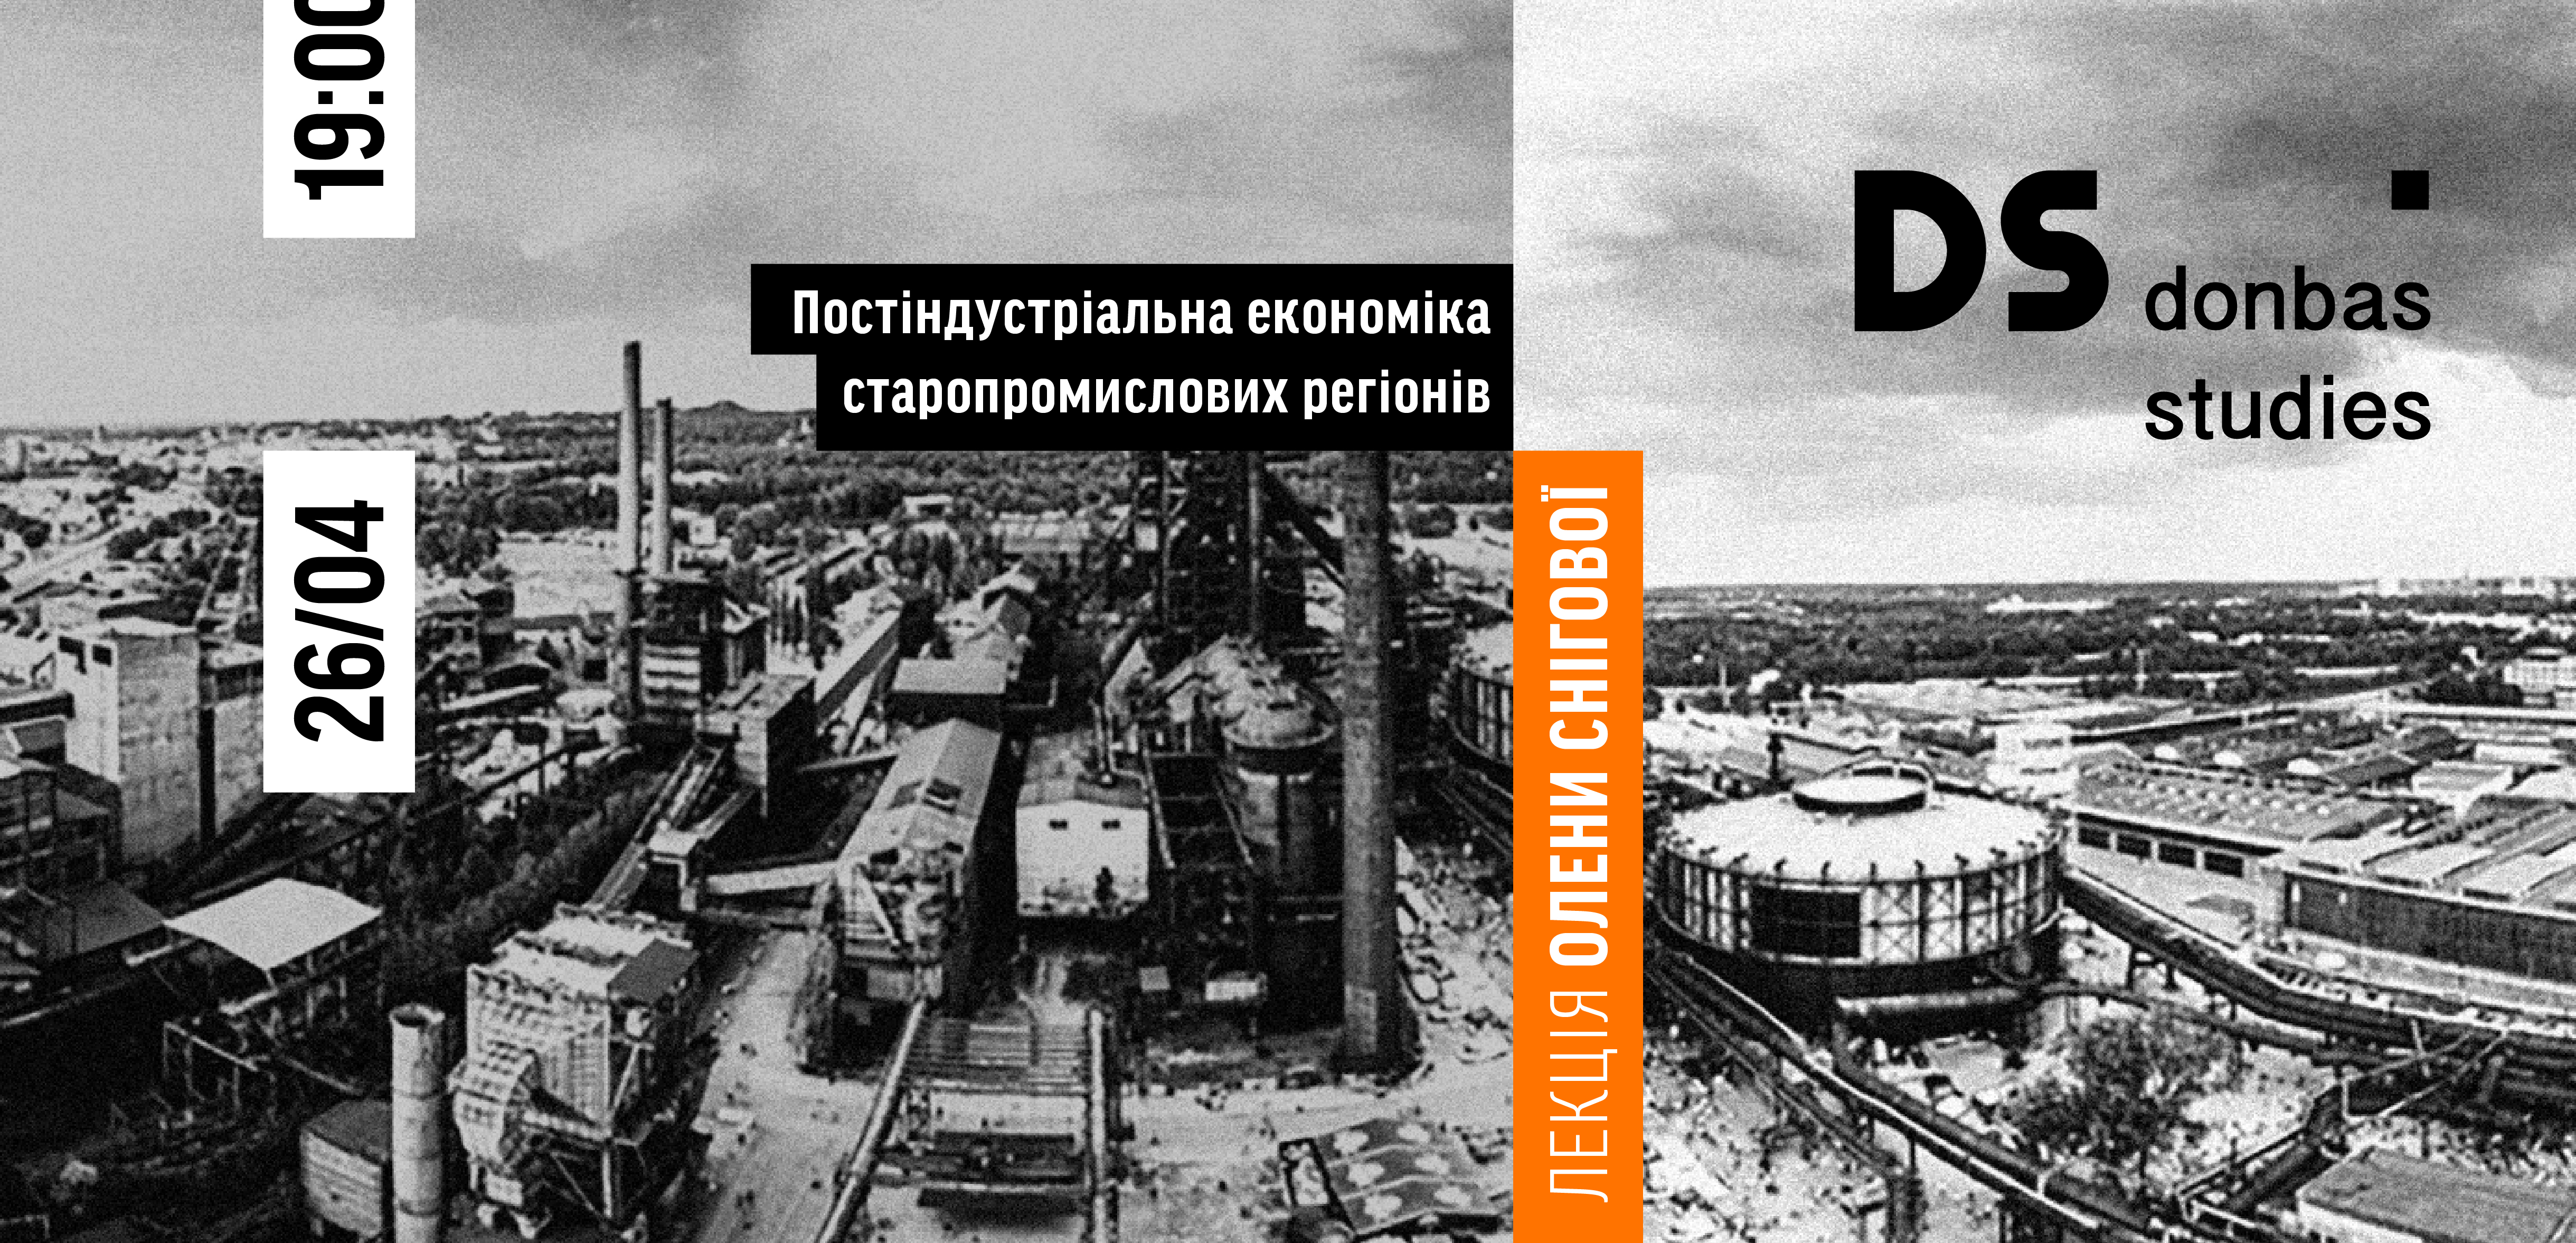 Lecture Post-industrial economy of old industrial regions